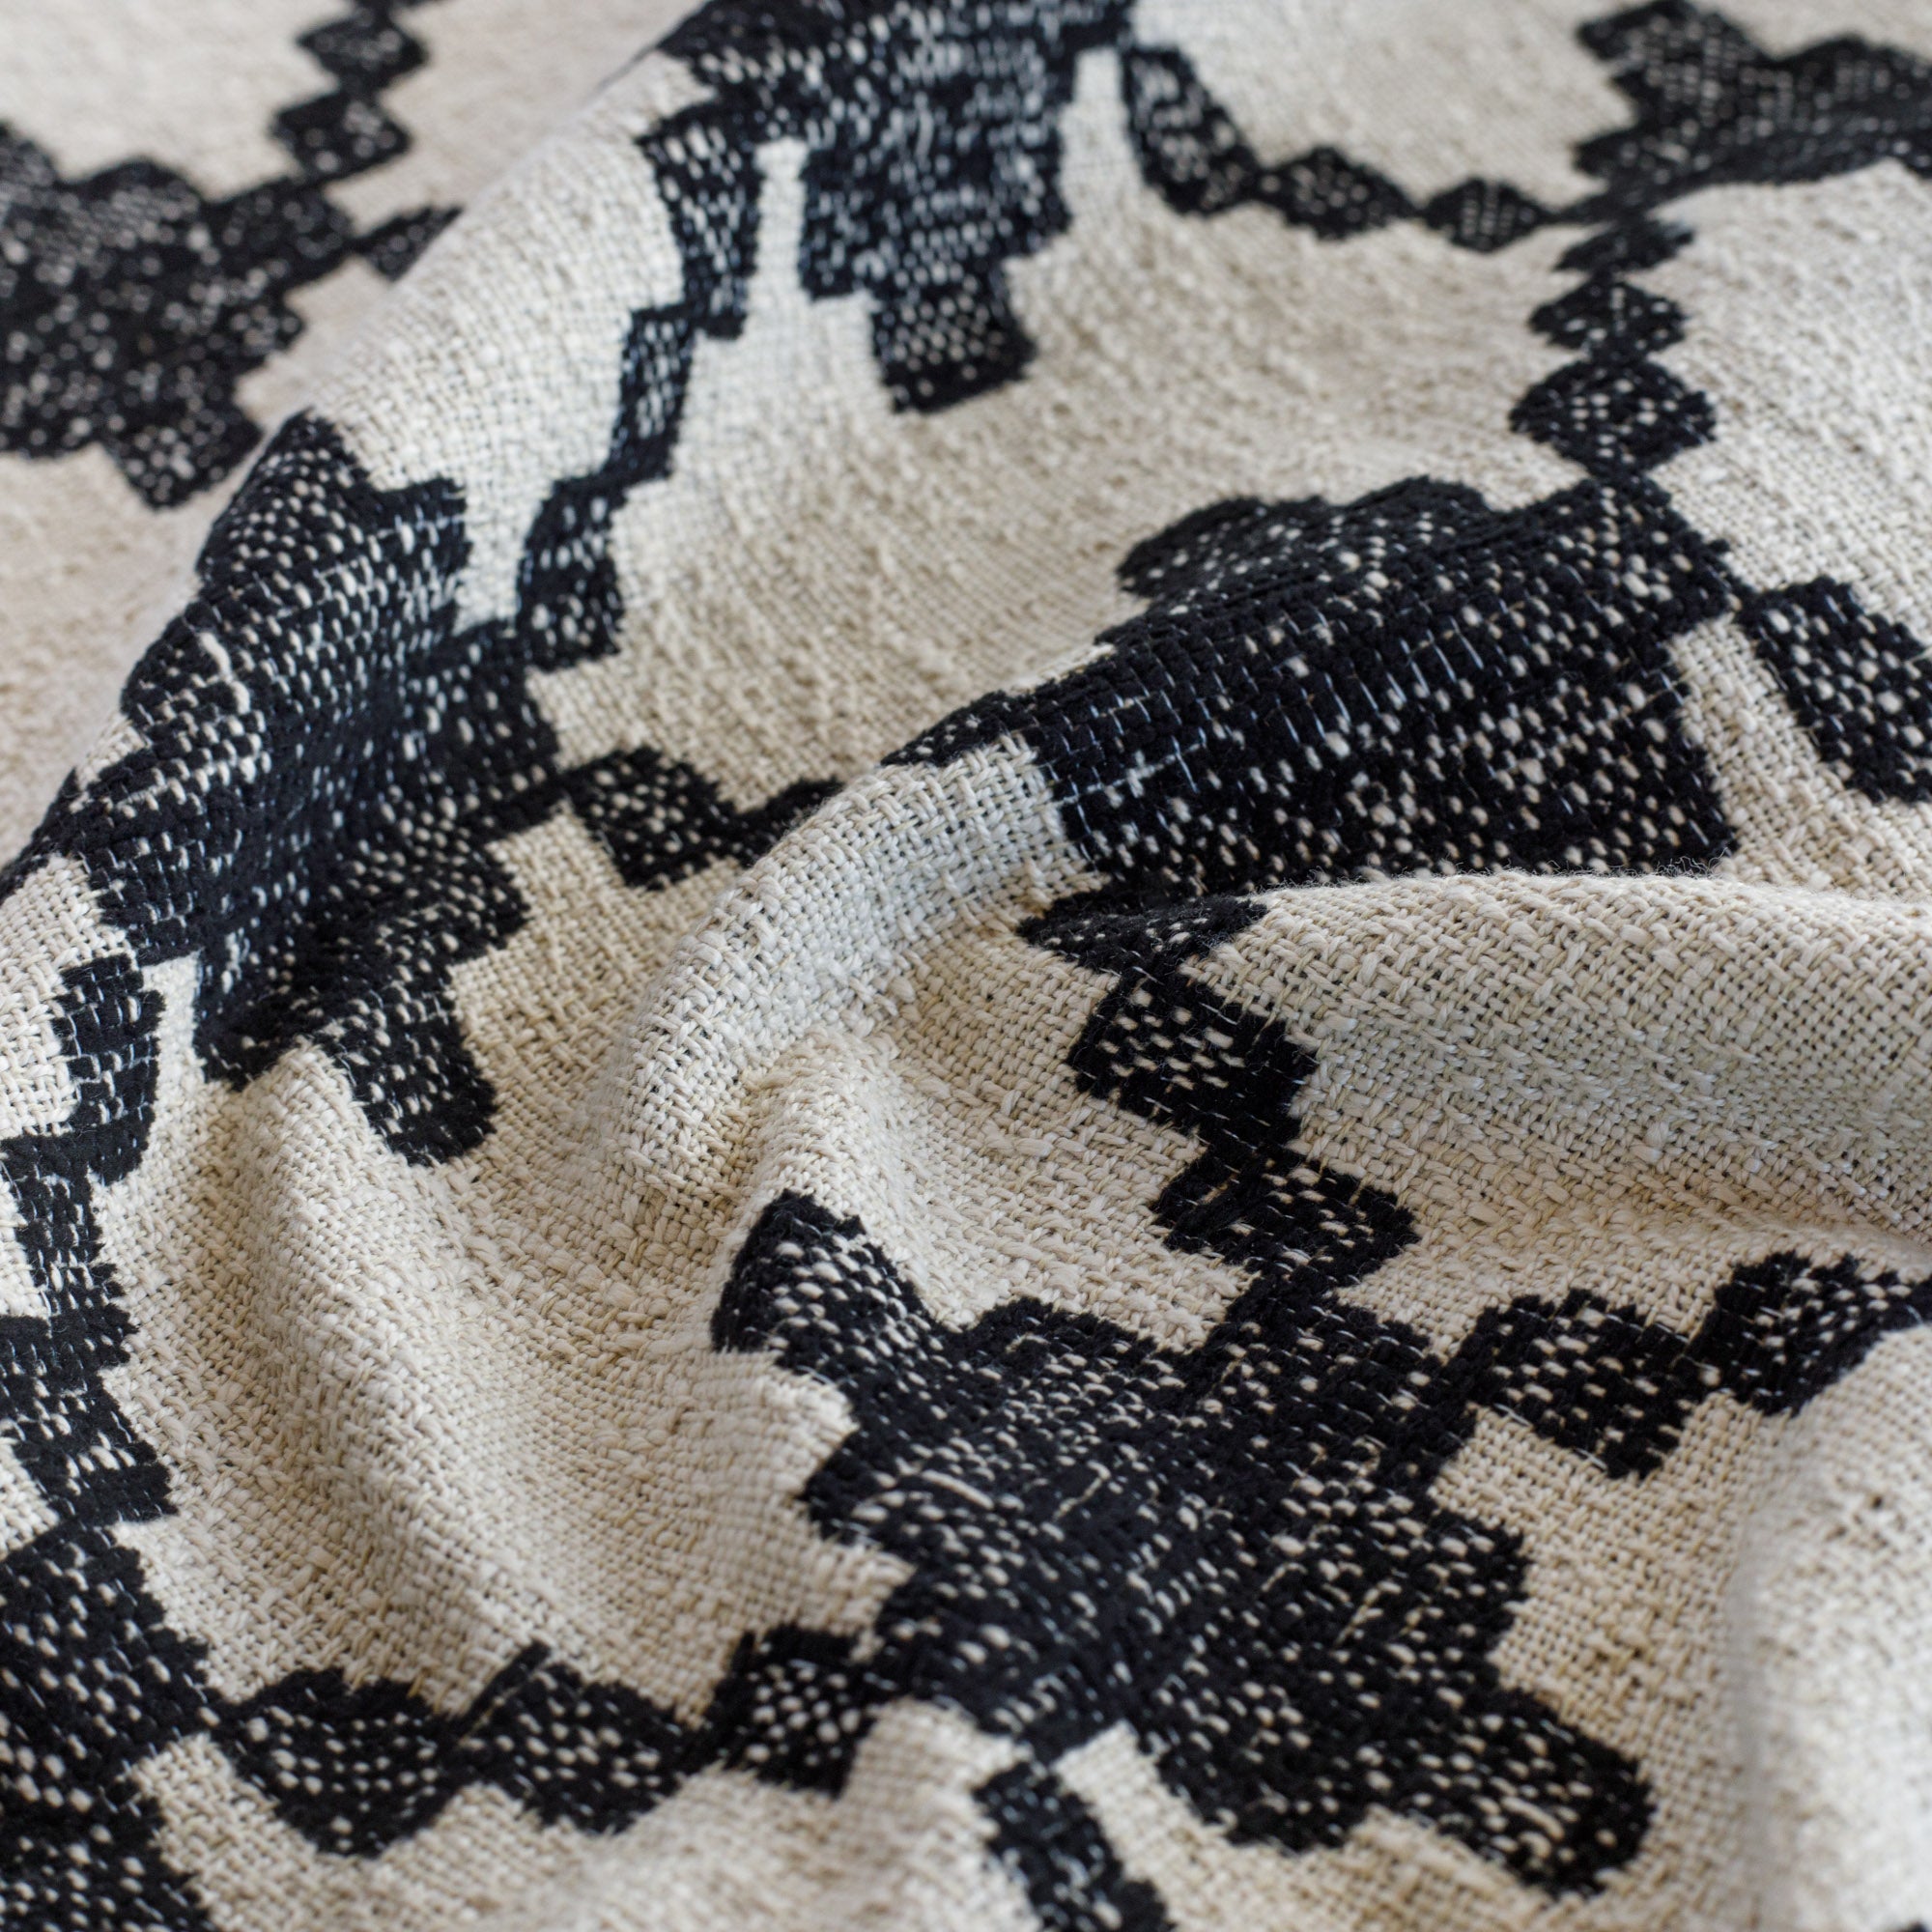 a black and natural abstract geometric patterned outdoor upholstery fabric : close up view